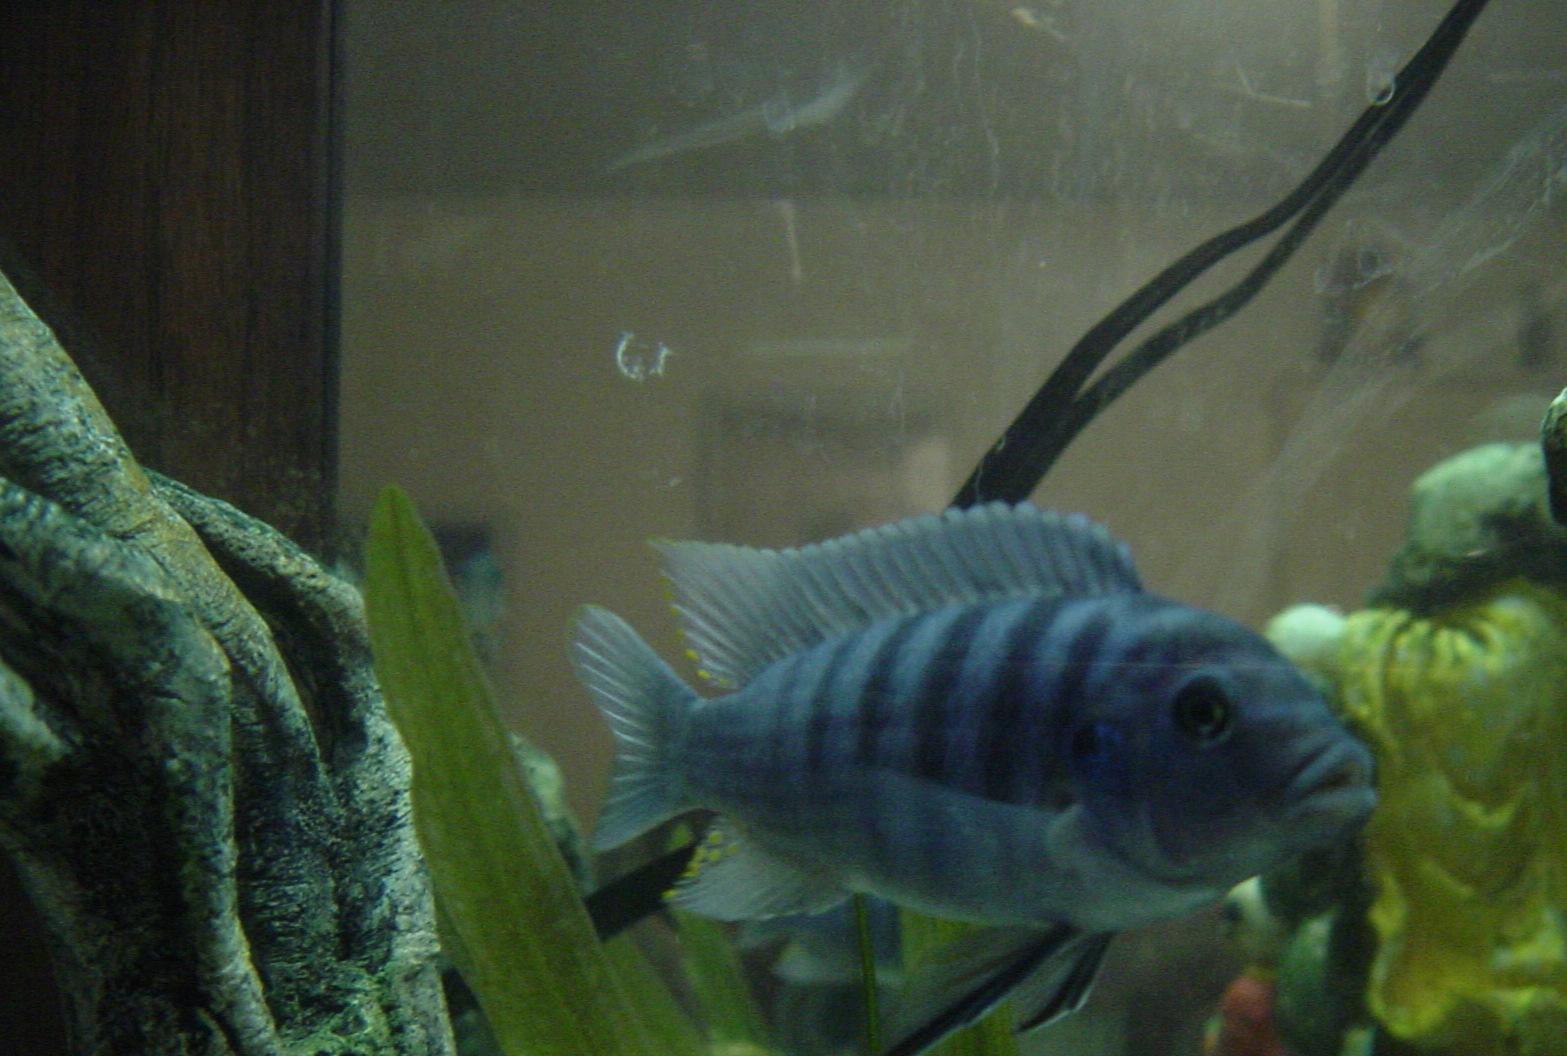 This is my beast Lemures, hes a fiesty little guy, and enjoys his days creating chaos with Pluto (jack dempsey).